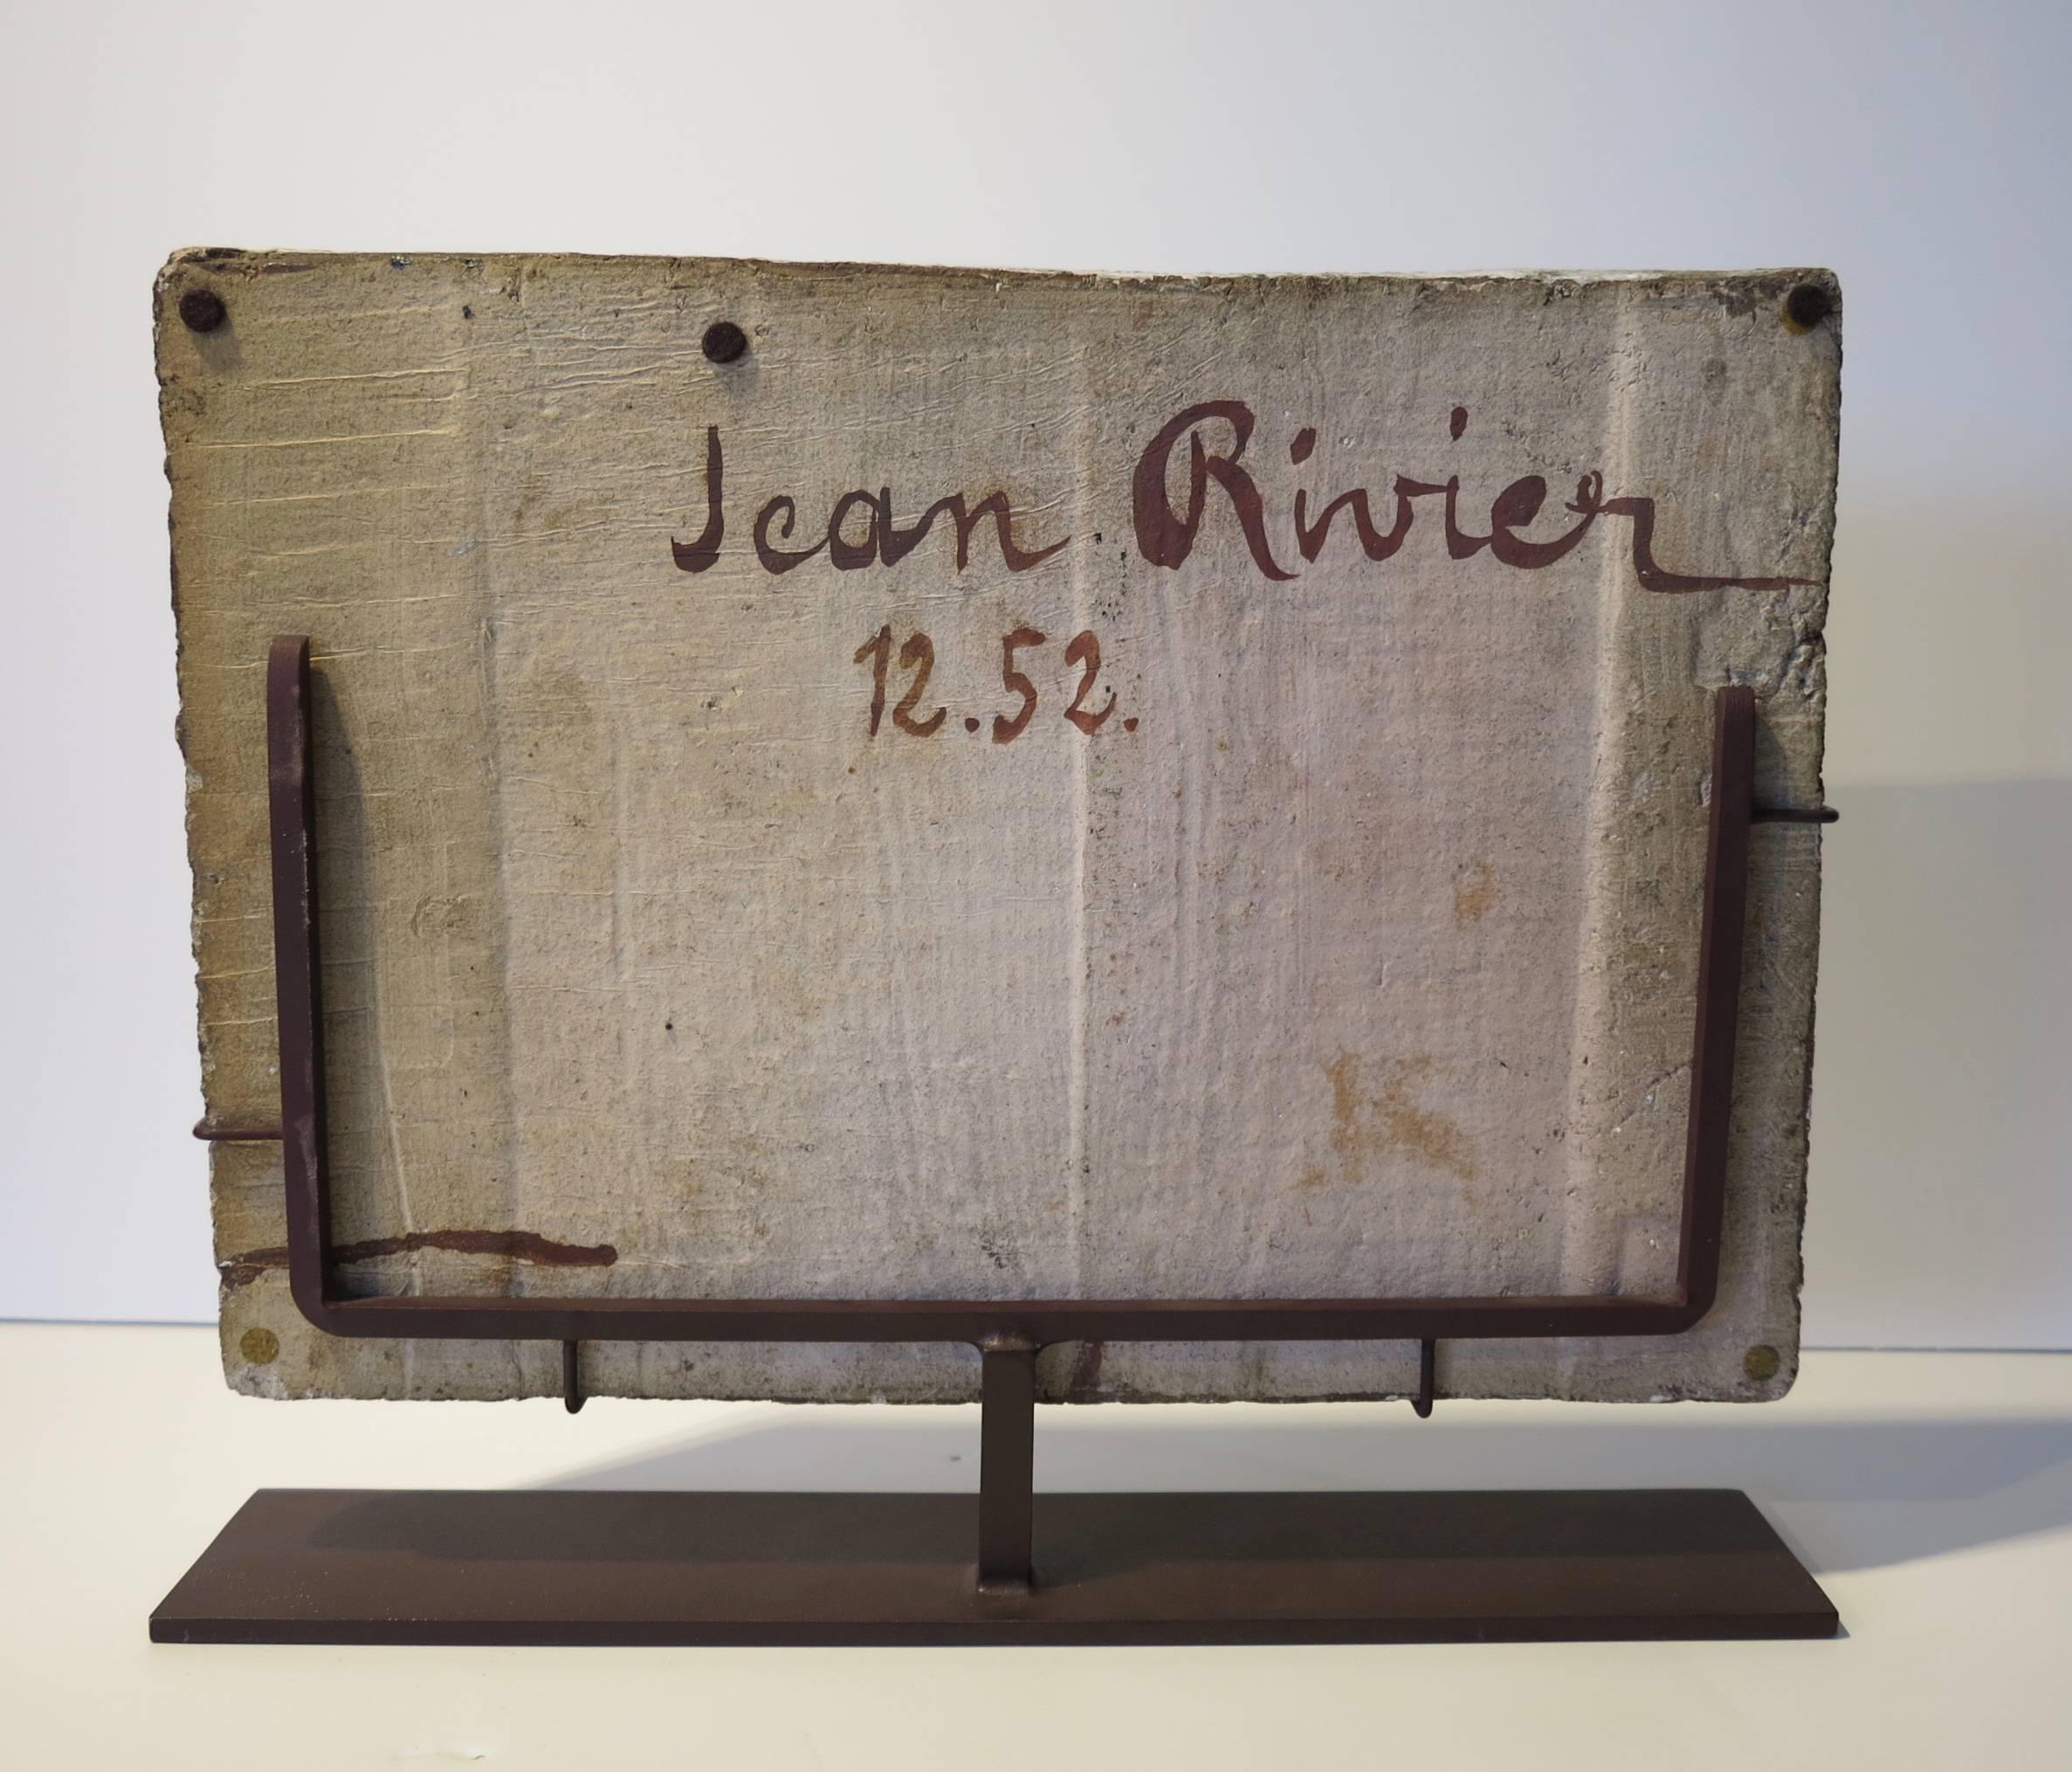 JEAN RIVIER (b. 1915). Plaque with abstract design, France, 1952; Glazed stoneware, painted metal stand; Signed and dated; 13″ x 16″ x 3″, plaque only: 11″ x 15 1/2″ x 1″. Custom painted iron stand by American Primitives, NYC. 